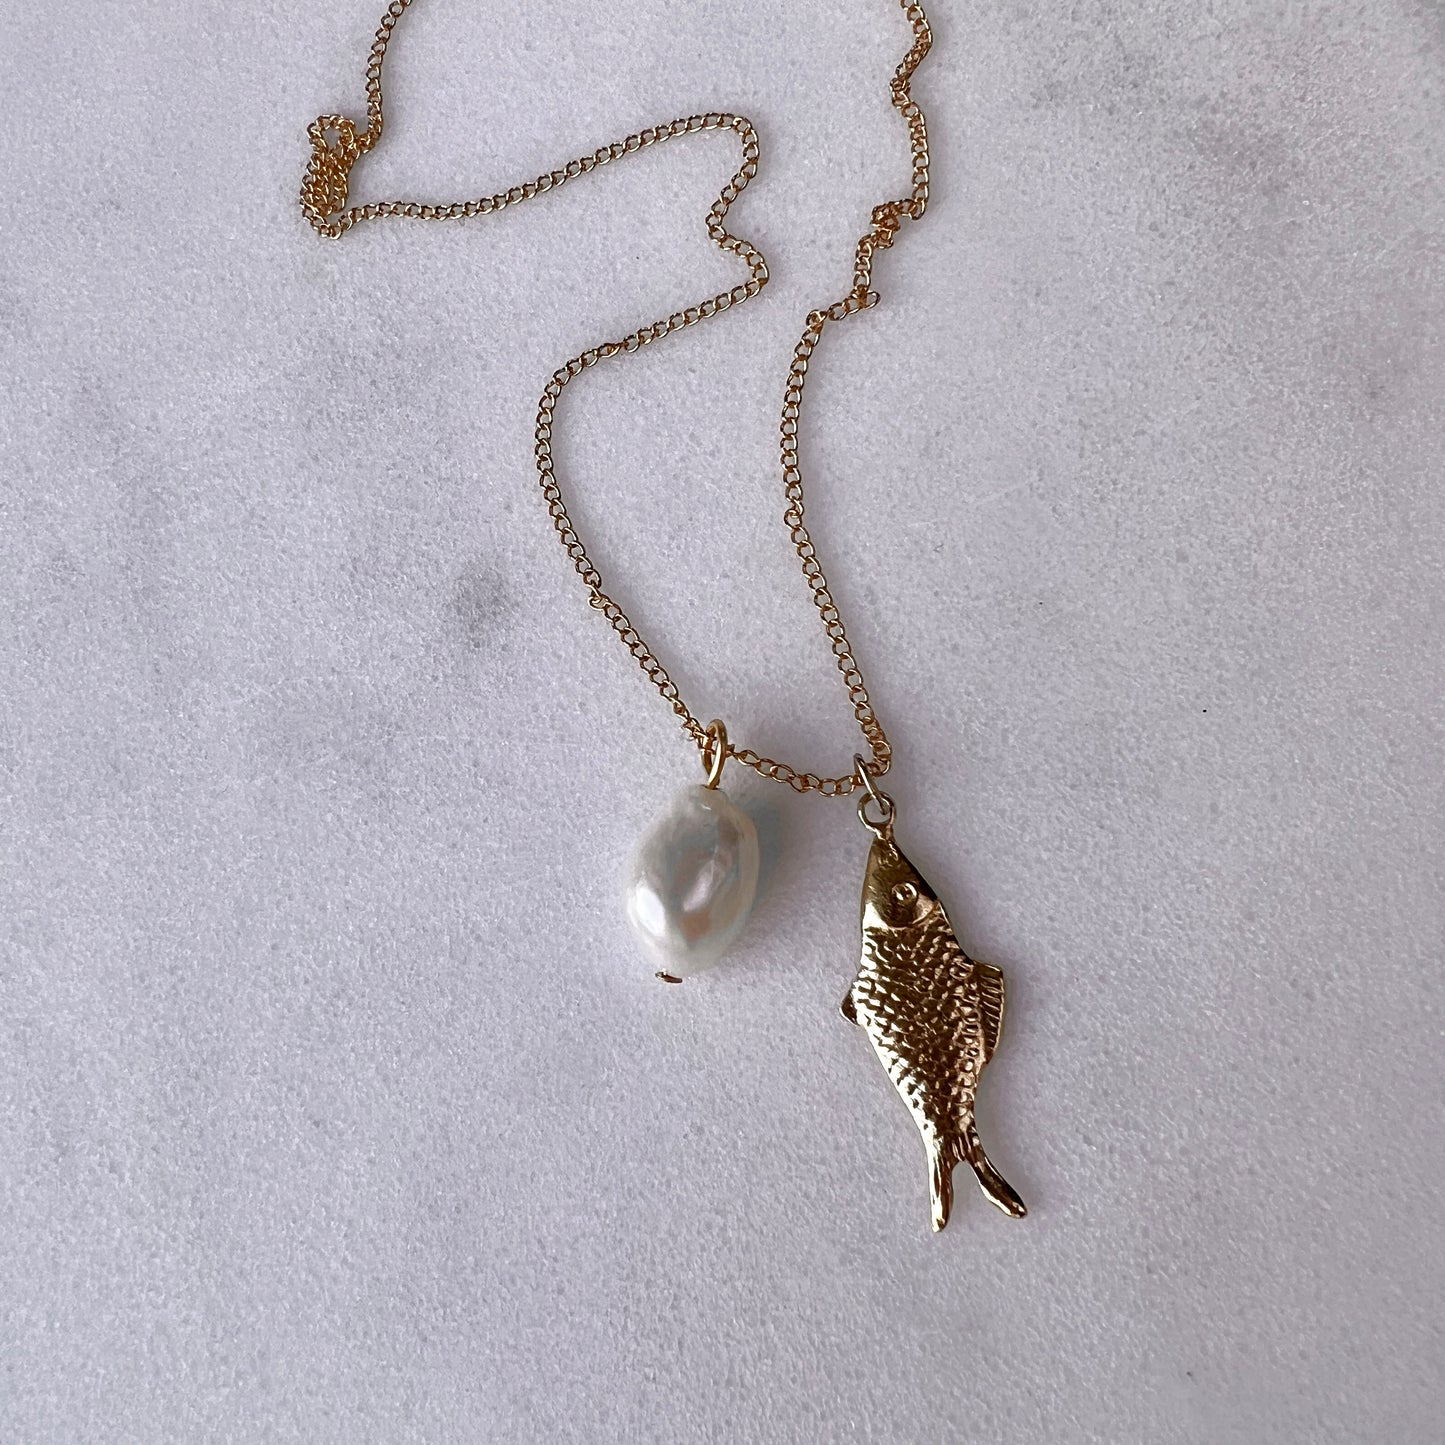 Lucky Fish Necklace with a Pearl